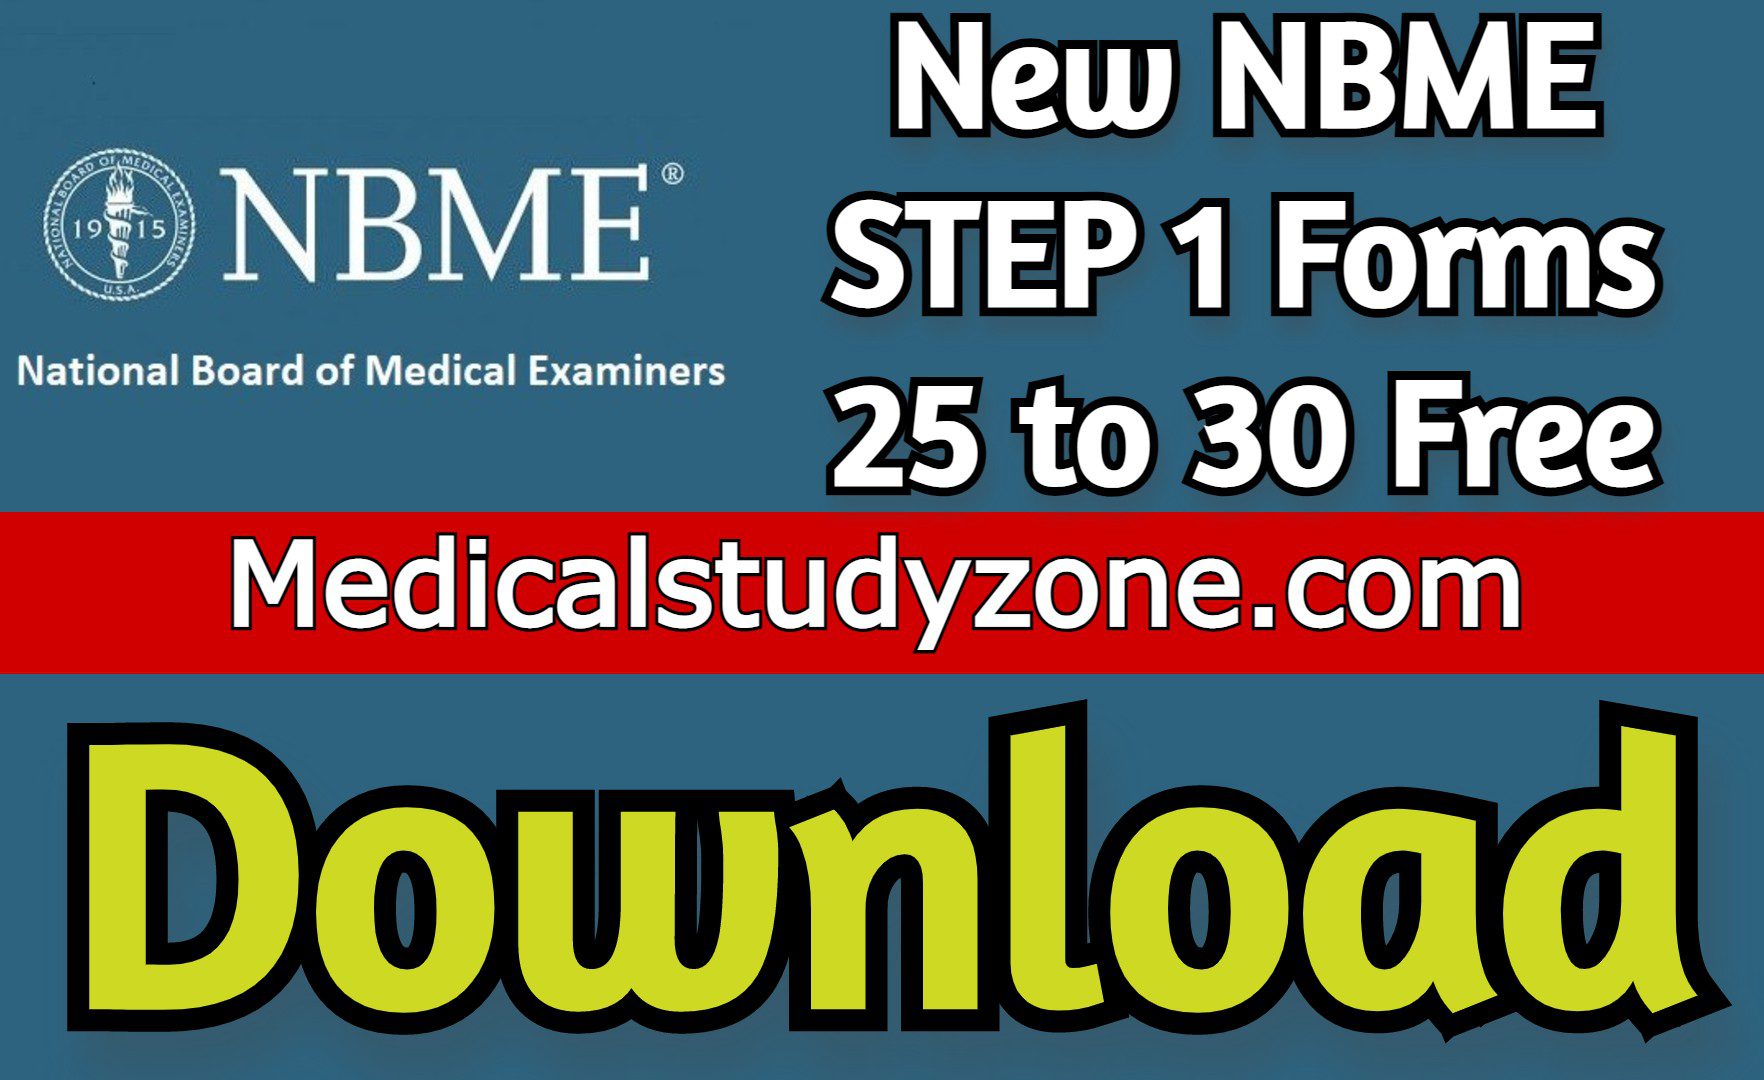 Download New NBME STEP 1 2021 Forms 25 to 30 Free